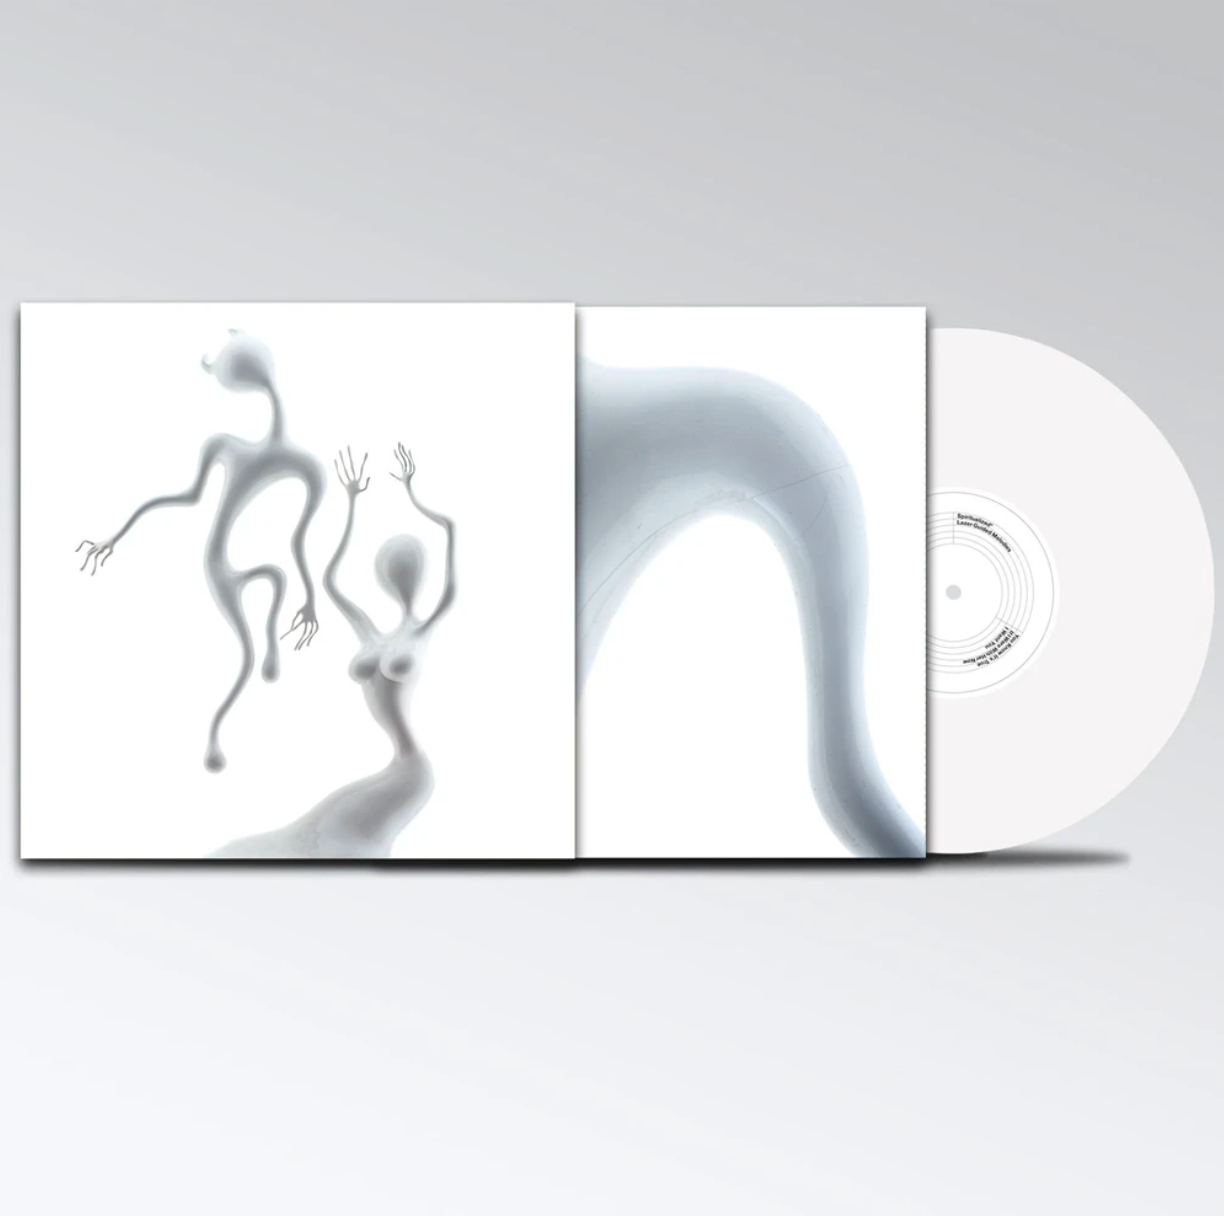 Spiritualized and Fat Possum Records are proud to announce the first stage of The Spaceman Reissue Program: definitive vinyl releases of the first four Spiritualized albums. Curated by Jason Pierce, the series will kick off April 23rd with Spiritualized’s classic 1992 debut LP: Lazer Guided Melodies.